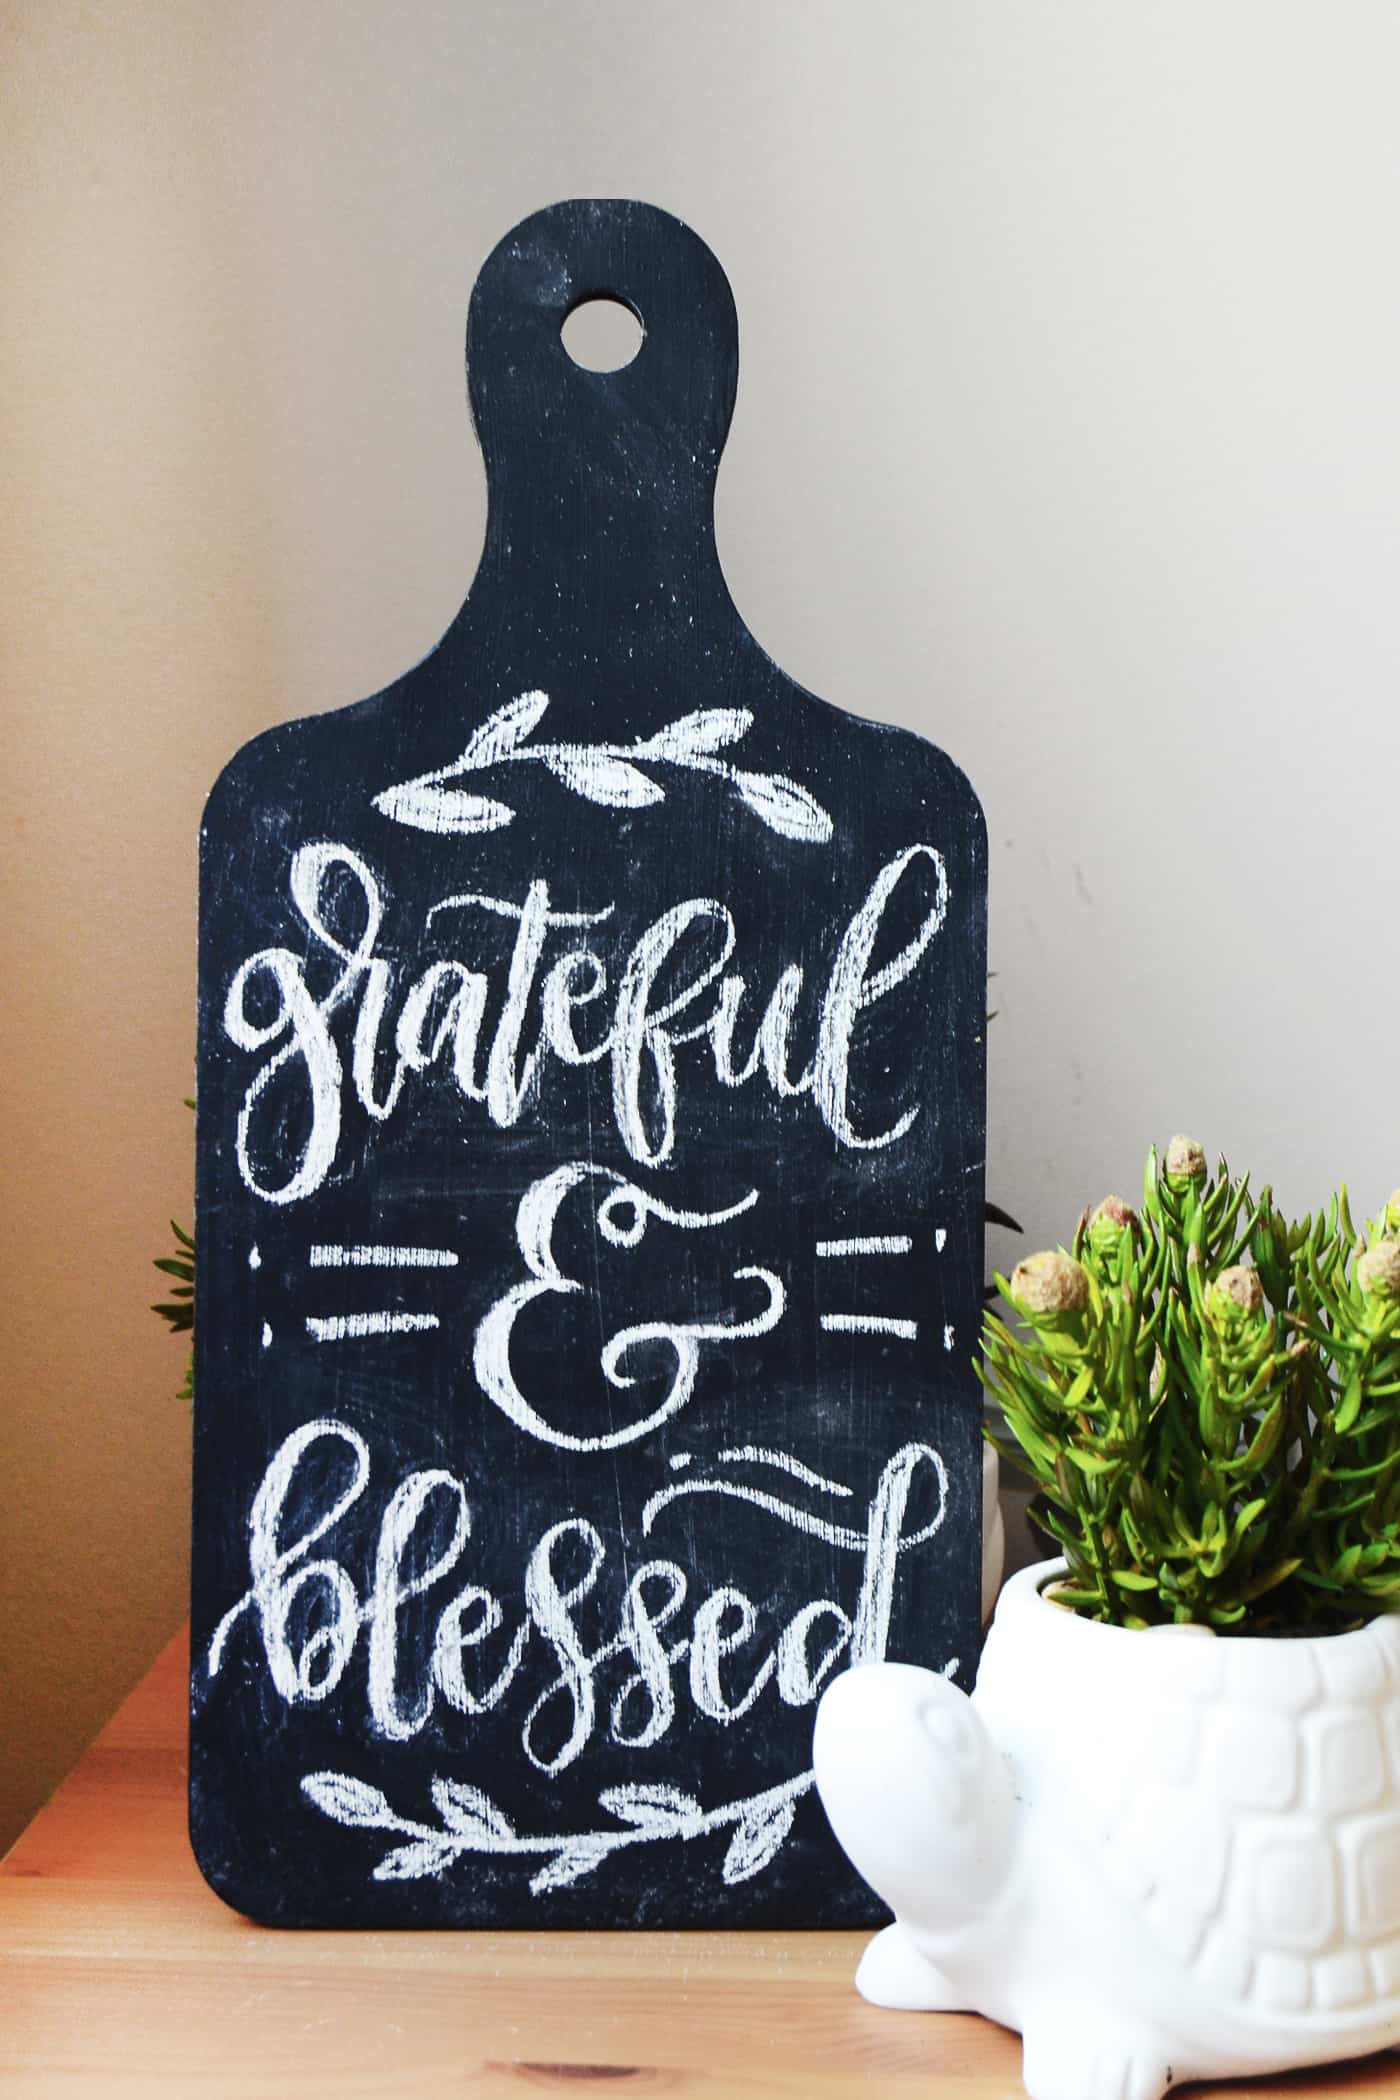 Bread board painted with black chalkboard paint displayed for the holidays